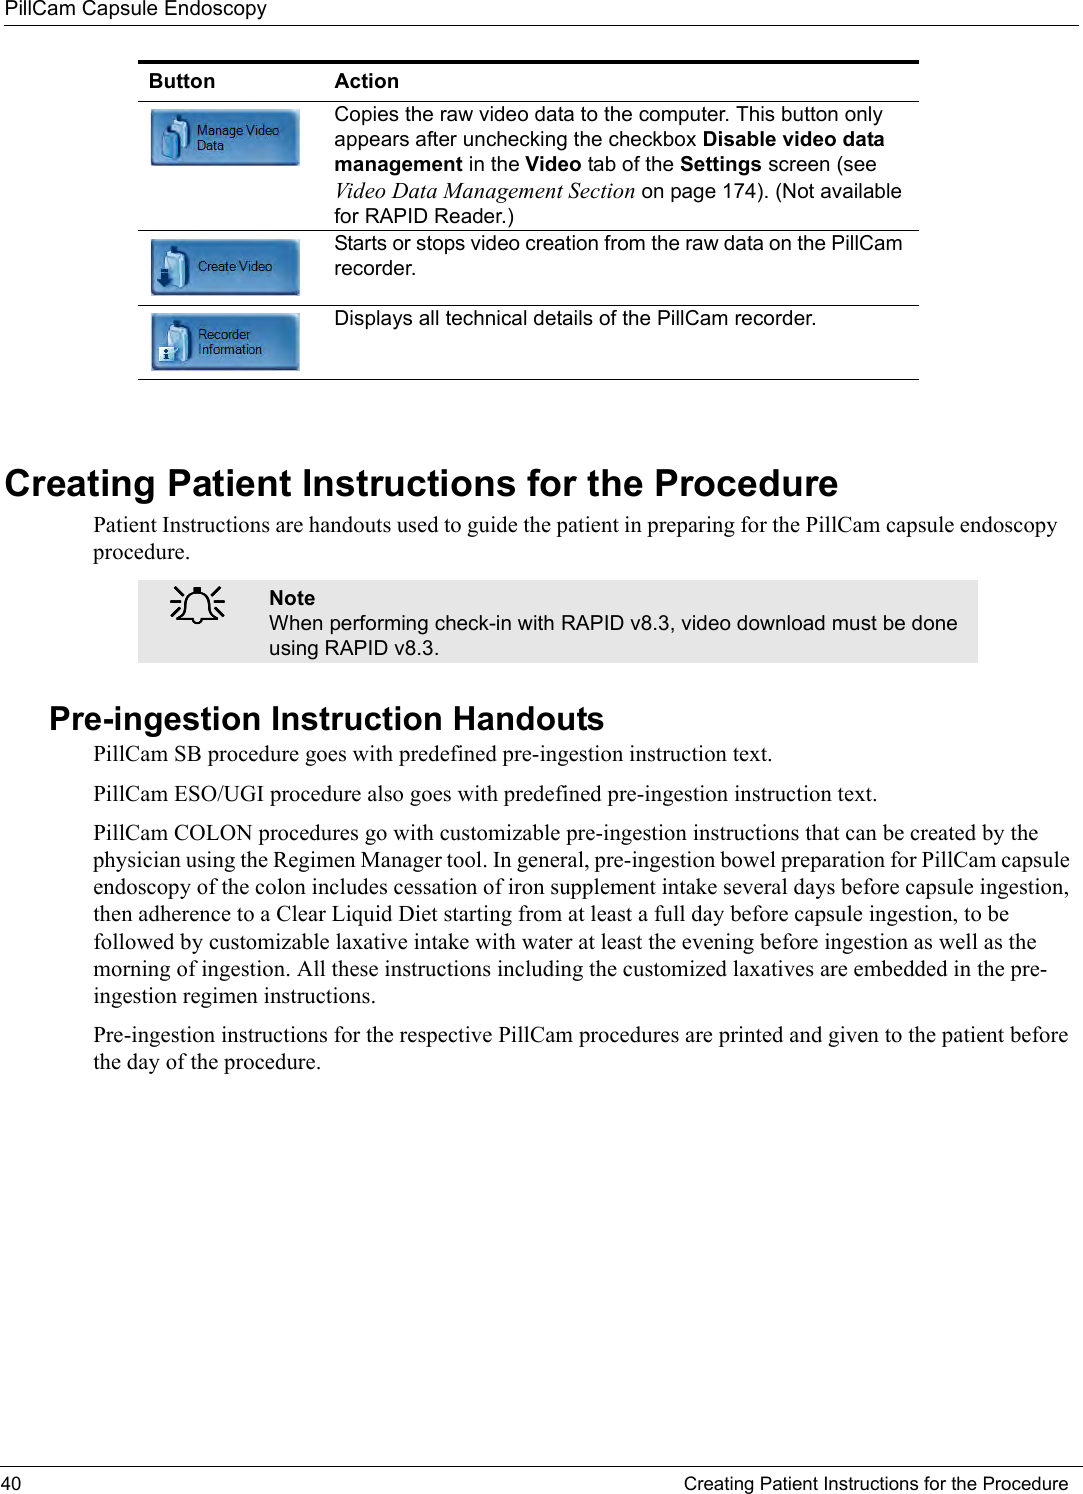 PillCam Capsule Endoscopy40 Creating Patient Instructions for the ProcedureCreating Patient Instructions for the ProcedurePatient Instructions are handouts used to guide the patient in preparing for the PillCam capsule endoscopy procedure. Pre-ingestion Instruction HandoutsPillCam SB procedure goes with predefined pre-ingestion instruction text. PillCam ESO/UGI procedure also goes with predefined pre-ingestion instruction text. PillCam COLON procedures go with customizable pre-ingestion instructions that can be created by the physician using the Regimen Manager tool. In general, pre-ingestion bowel preparation for PillCam capsule endoscopy of the colon includes cessation of iron supplement intake several days before capsule ingestion, then adherence to a Clear Liquid Diet starting from at least a full day before capsule ingestion, to be followed by customizable laxative intake with water at least the evening before ingestion as well as the morning of ingestion. All these instructions including the customized laxatives are embedded in the pre-ingestion regimen instructions.Pre-ingestion instructions for the respective PillCam procedures are printed and given to the patient before the day of the procedure.Copies the raw video data to the computer. This button only appears after unchecking the checkbox Disable video data management in the Video tab of the Settings screen (see Video Data Management Section on page 174). (Not available for RAPID Reader.) Starts or stops video creation from the raw data on the PillCam recorder.Displays all technical details of the PillCam recorder.֠֠֠֠NoteWhen performing check-in with RAPID v8.3, video download must be done using RAPID v8.3.Button Action